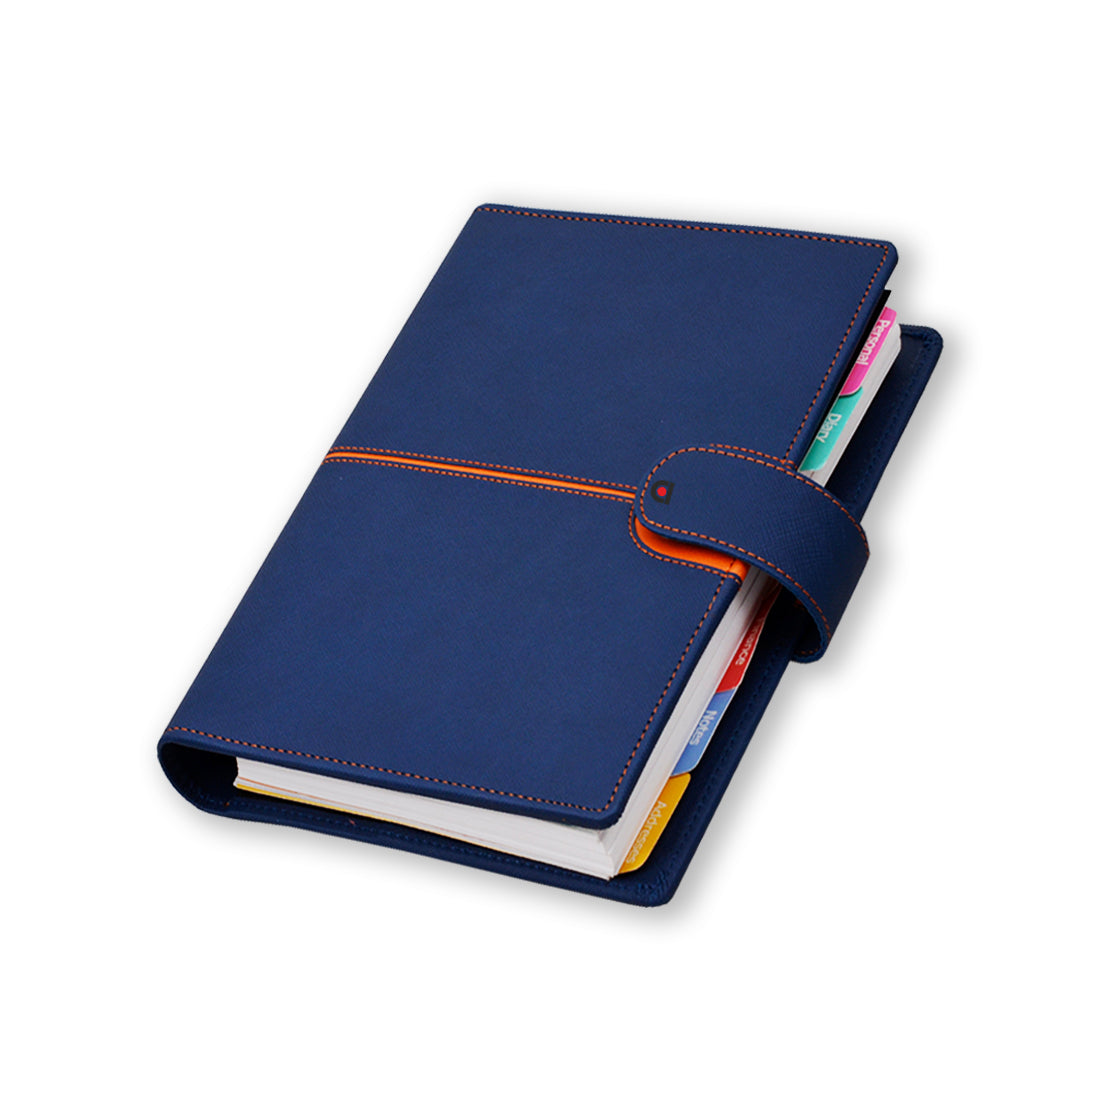 Buy 2023 Diary, Daily Planner, Cute Sticky Notes Online